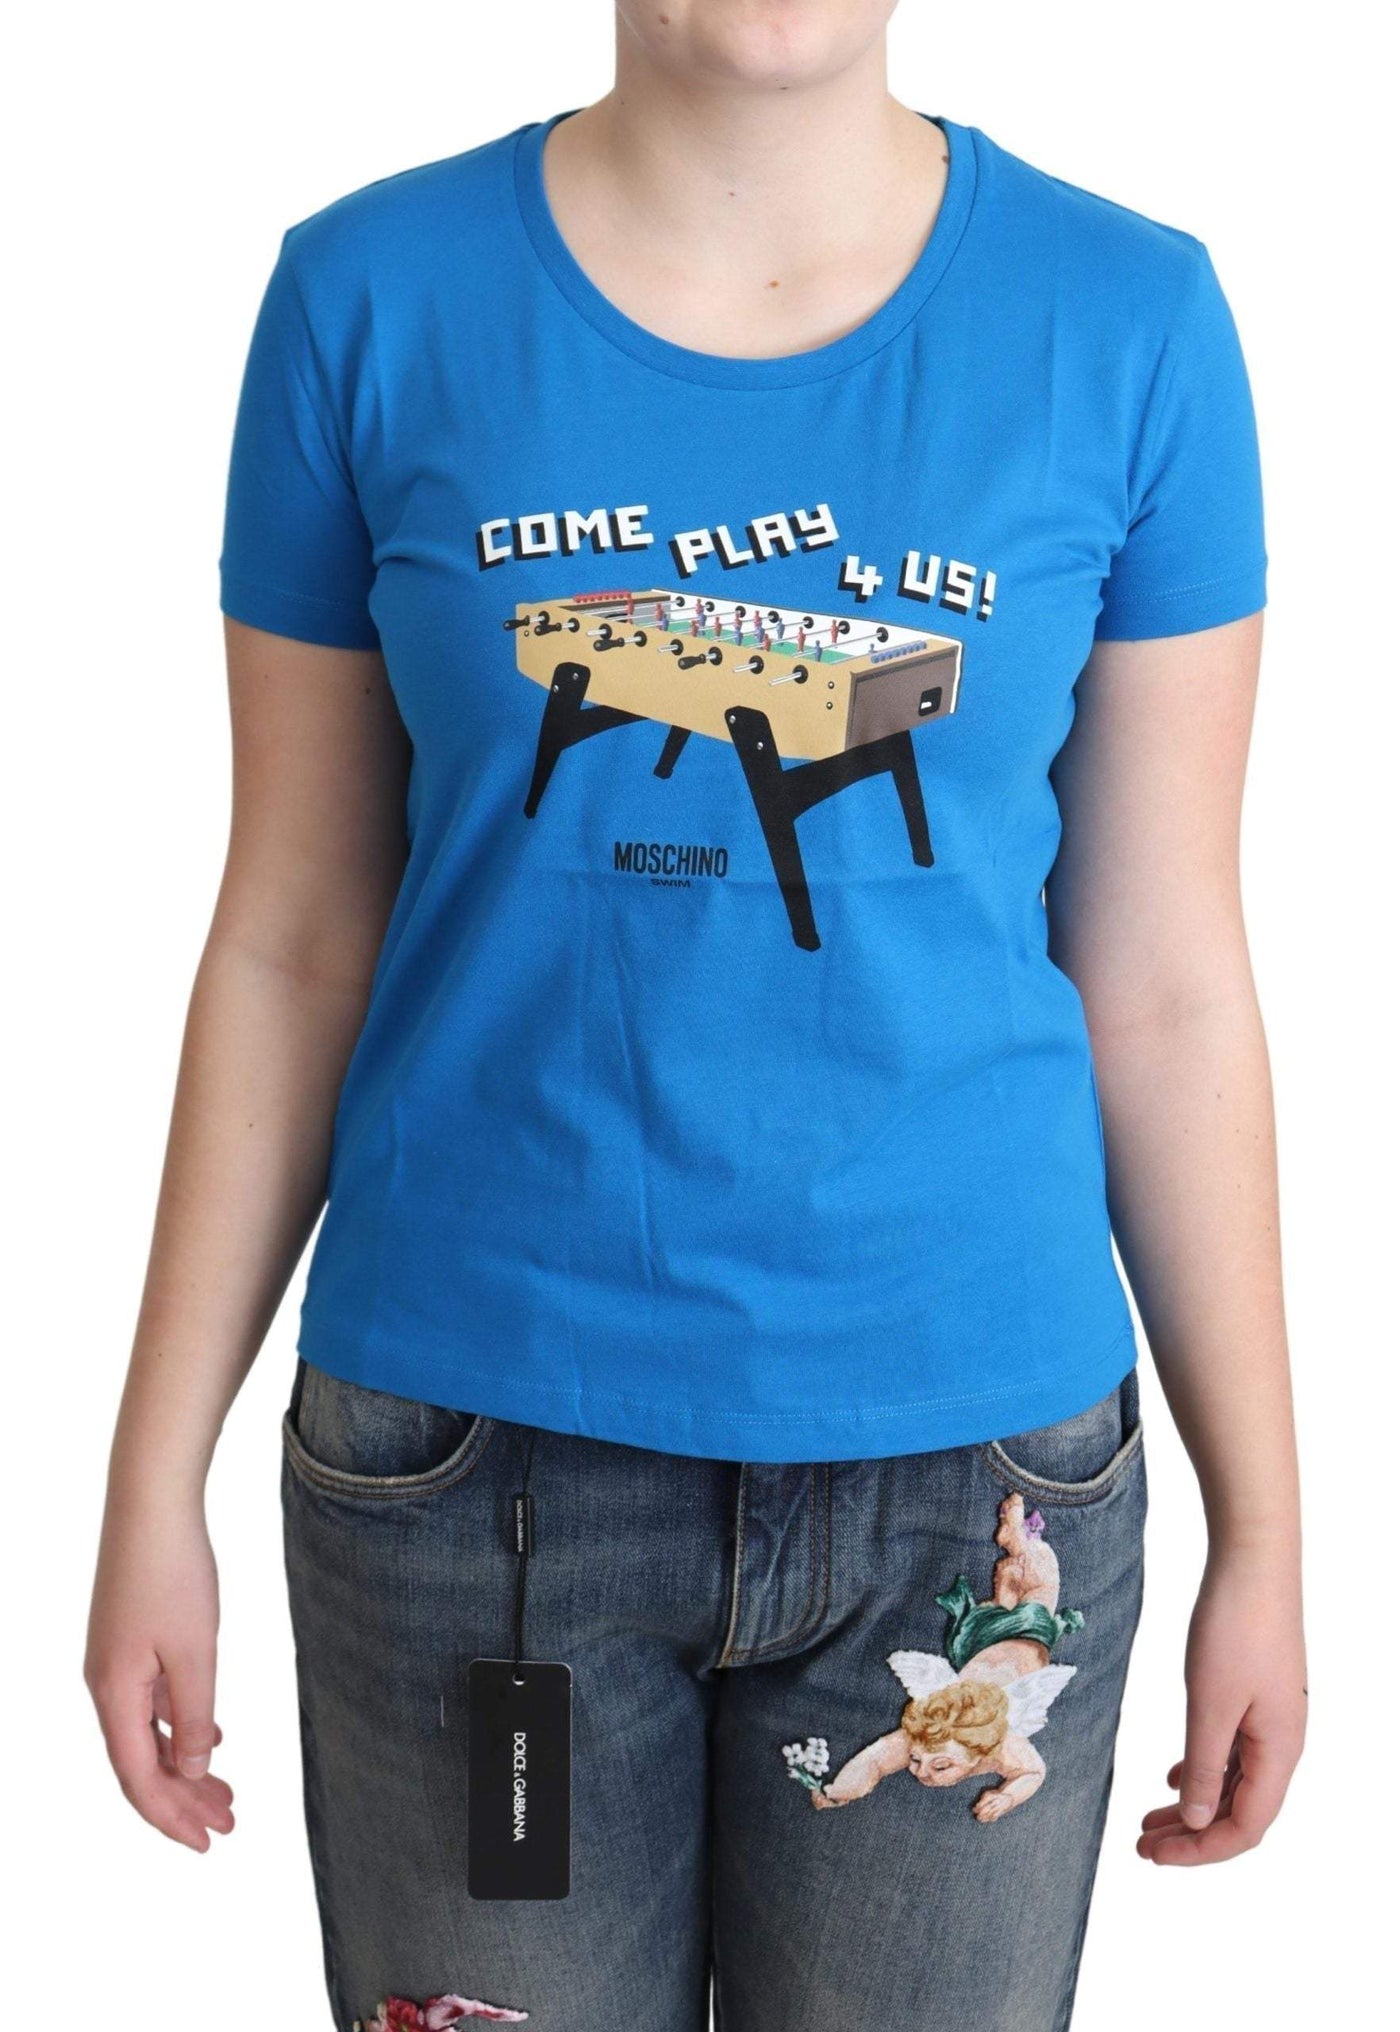 Moschino Blue Cotton Come Play 4 Us Print T-shirt #women, Blue, feed-agegroup-adult, feed-color-Blue, feed-gender-female, IT40|S, IT42|M, IT44|L, IT46|XL, Moschino, Tops & T-Shirts - Women - Clothing, Women - New Arrivals at SEYMAYKA